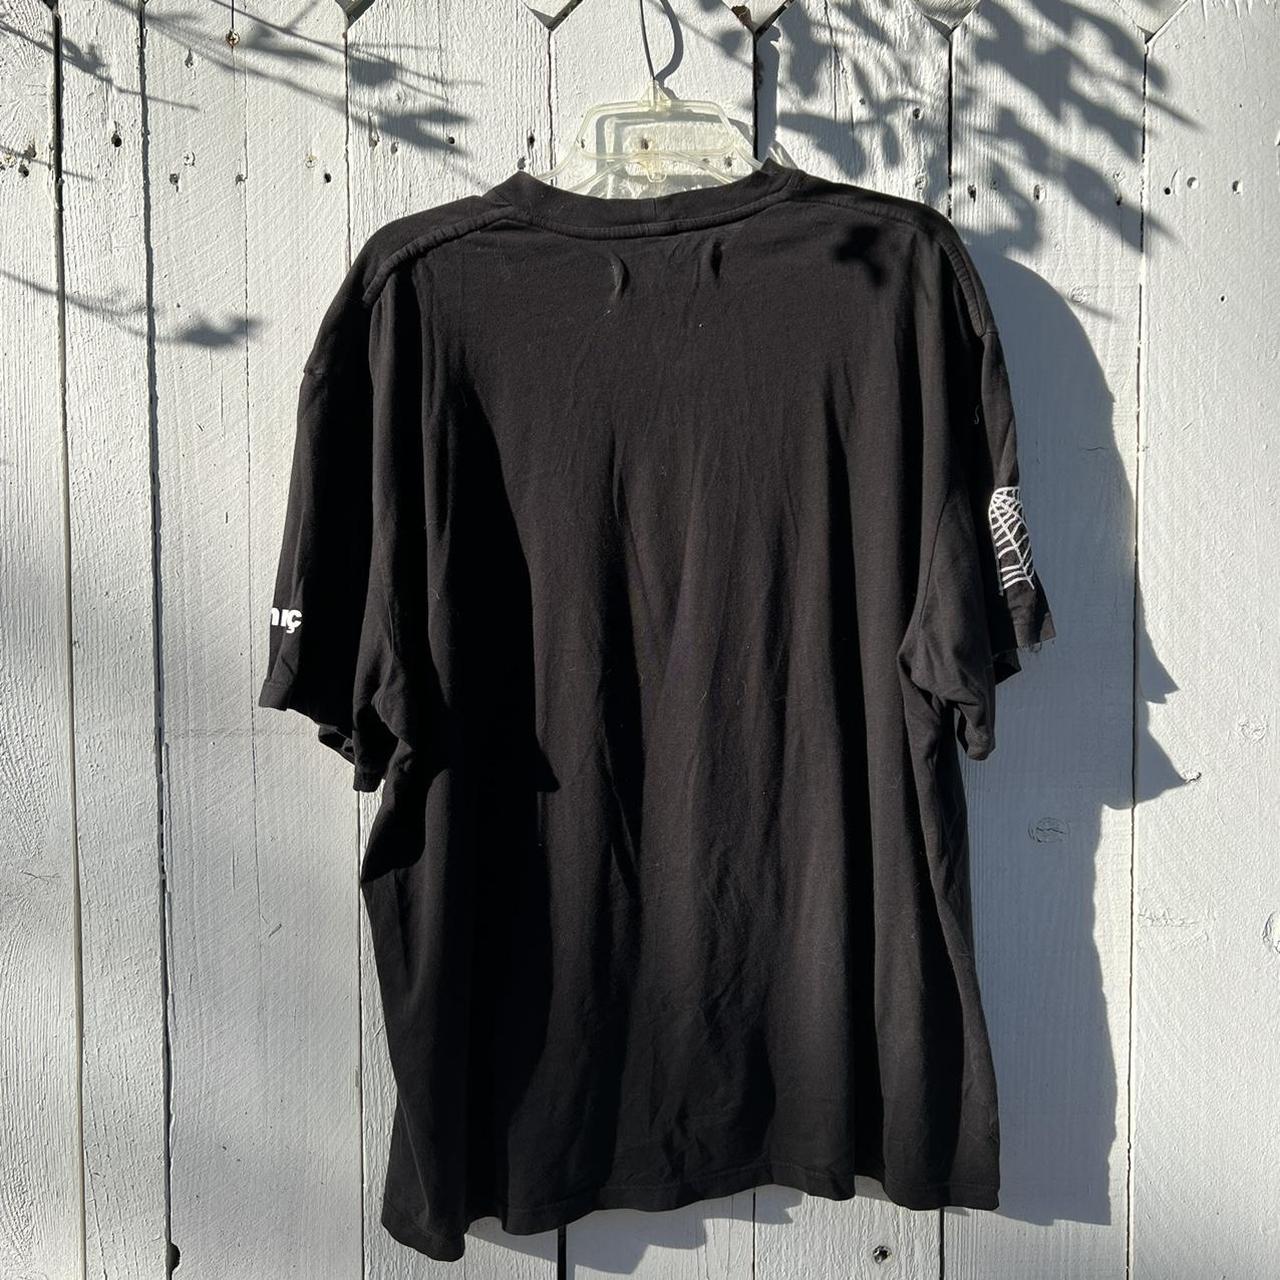 Product Image 4 - Mr. completely black tshirt //